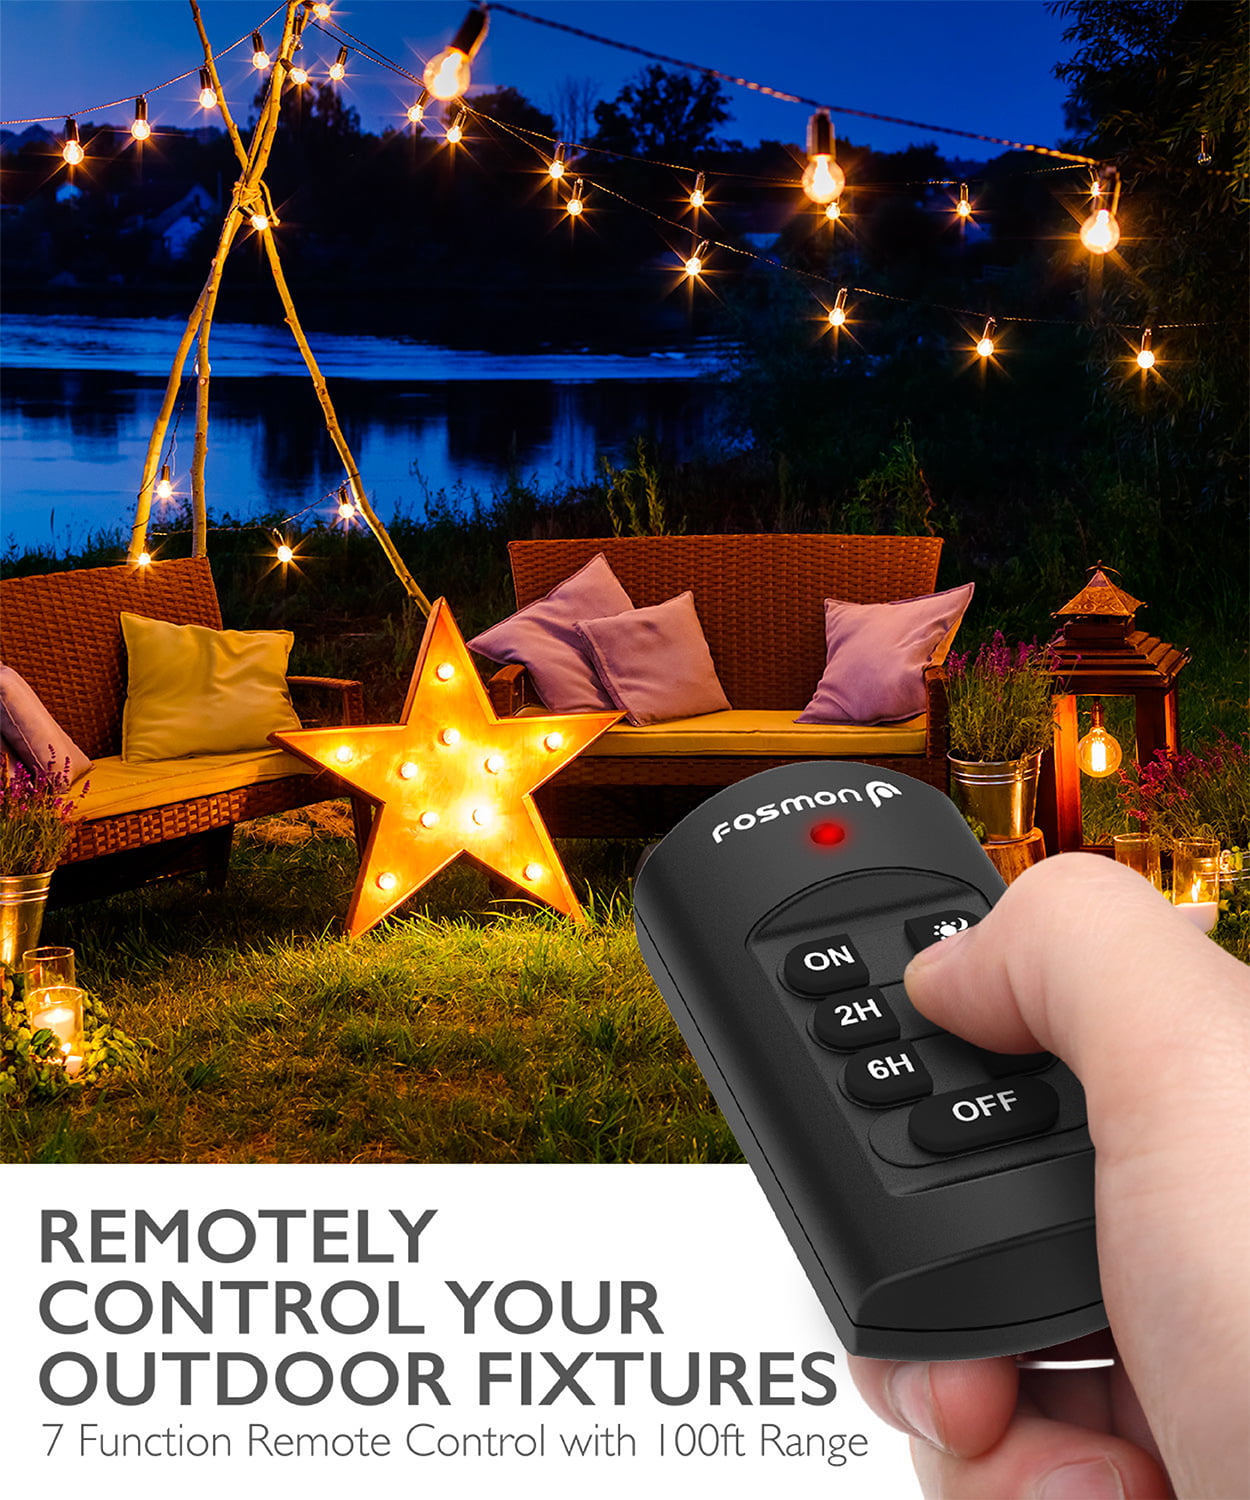 Fosmon 98ft Weatherproof Grounded Outdoor Wireless Remote